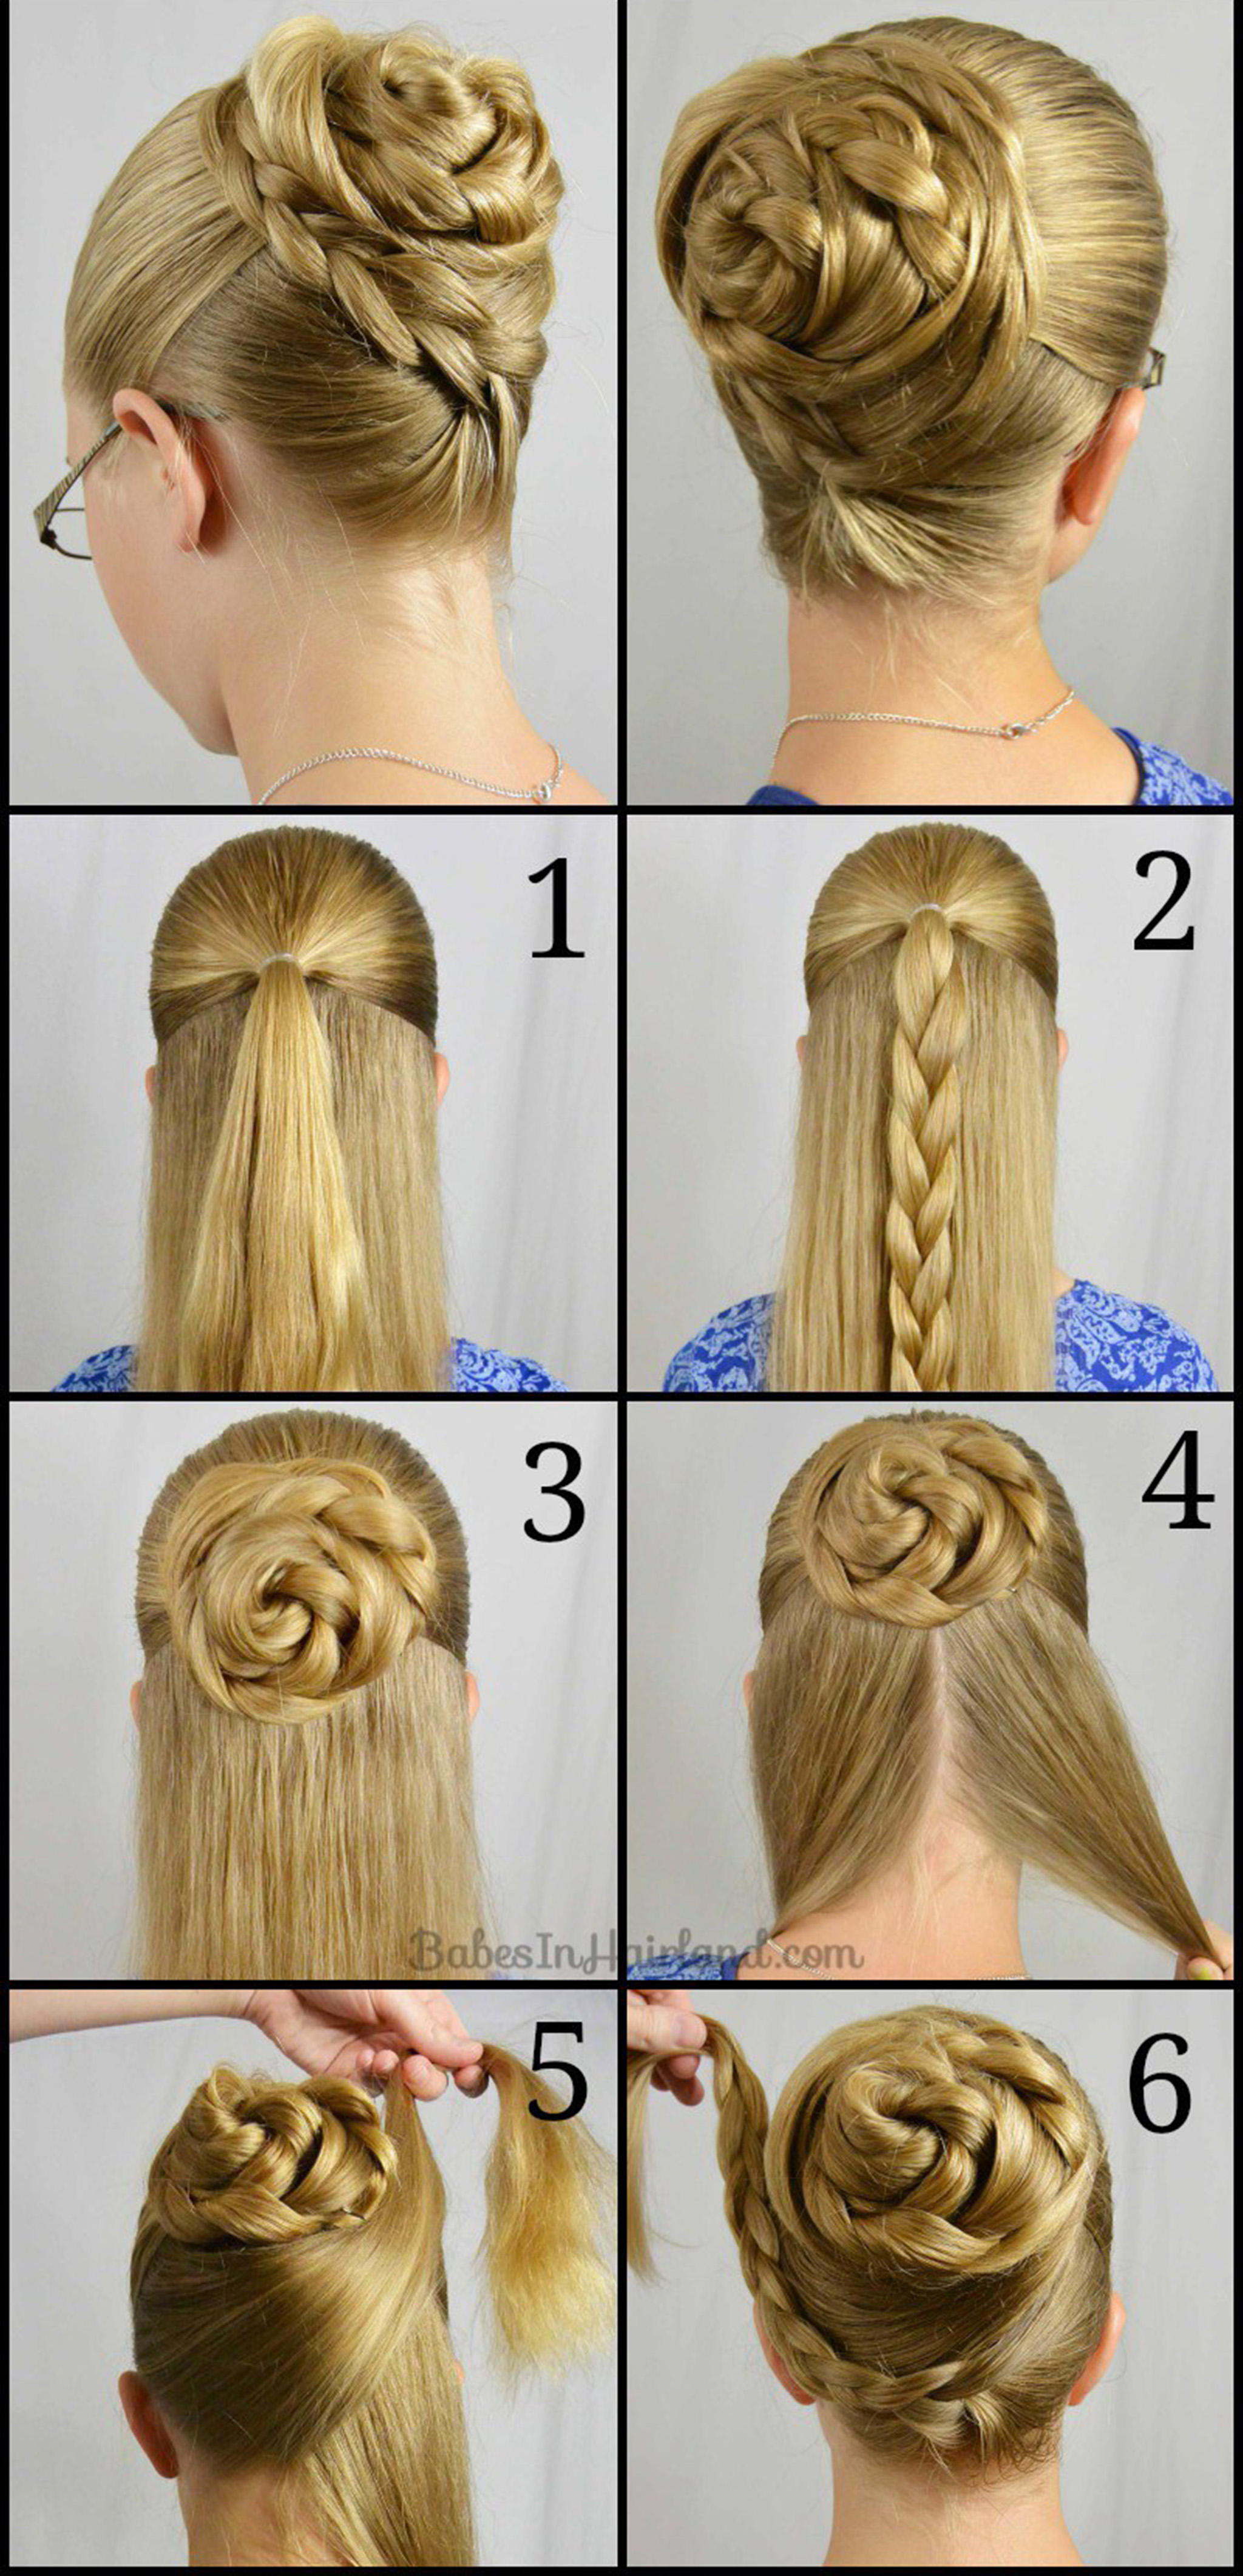 What Is The Best Hairstyle - Srzofa